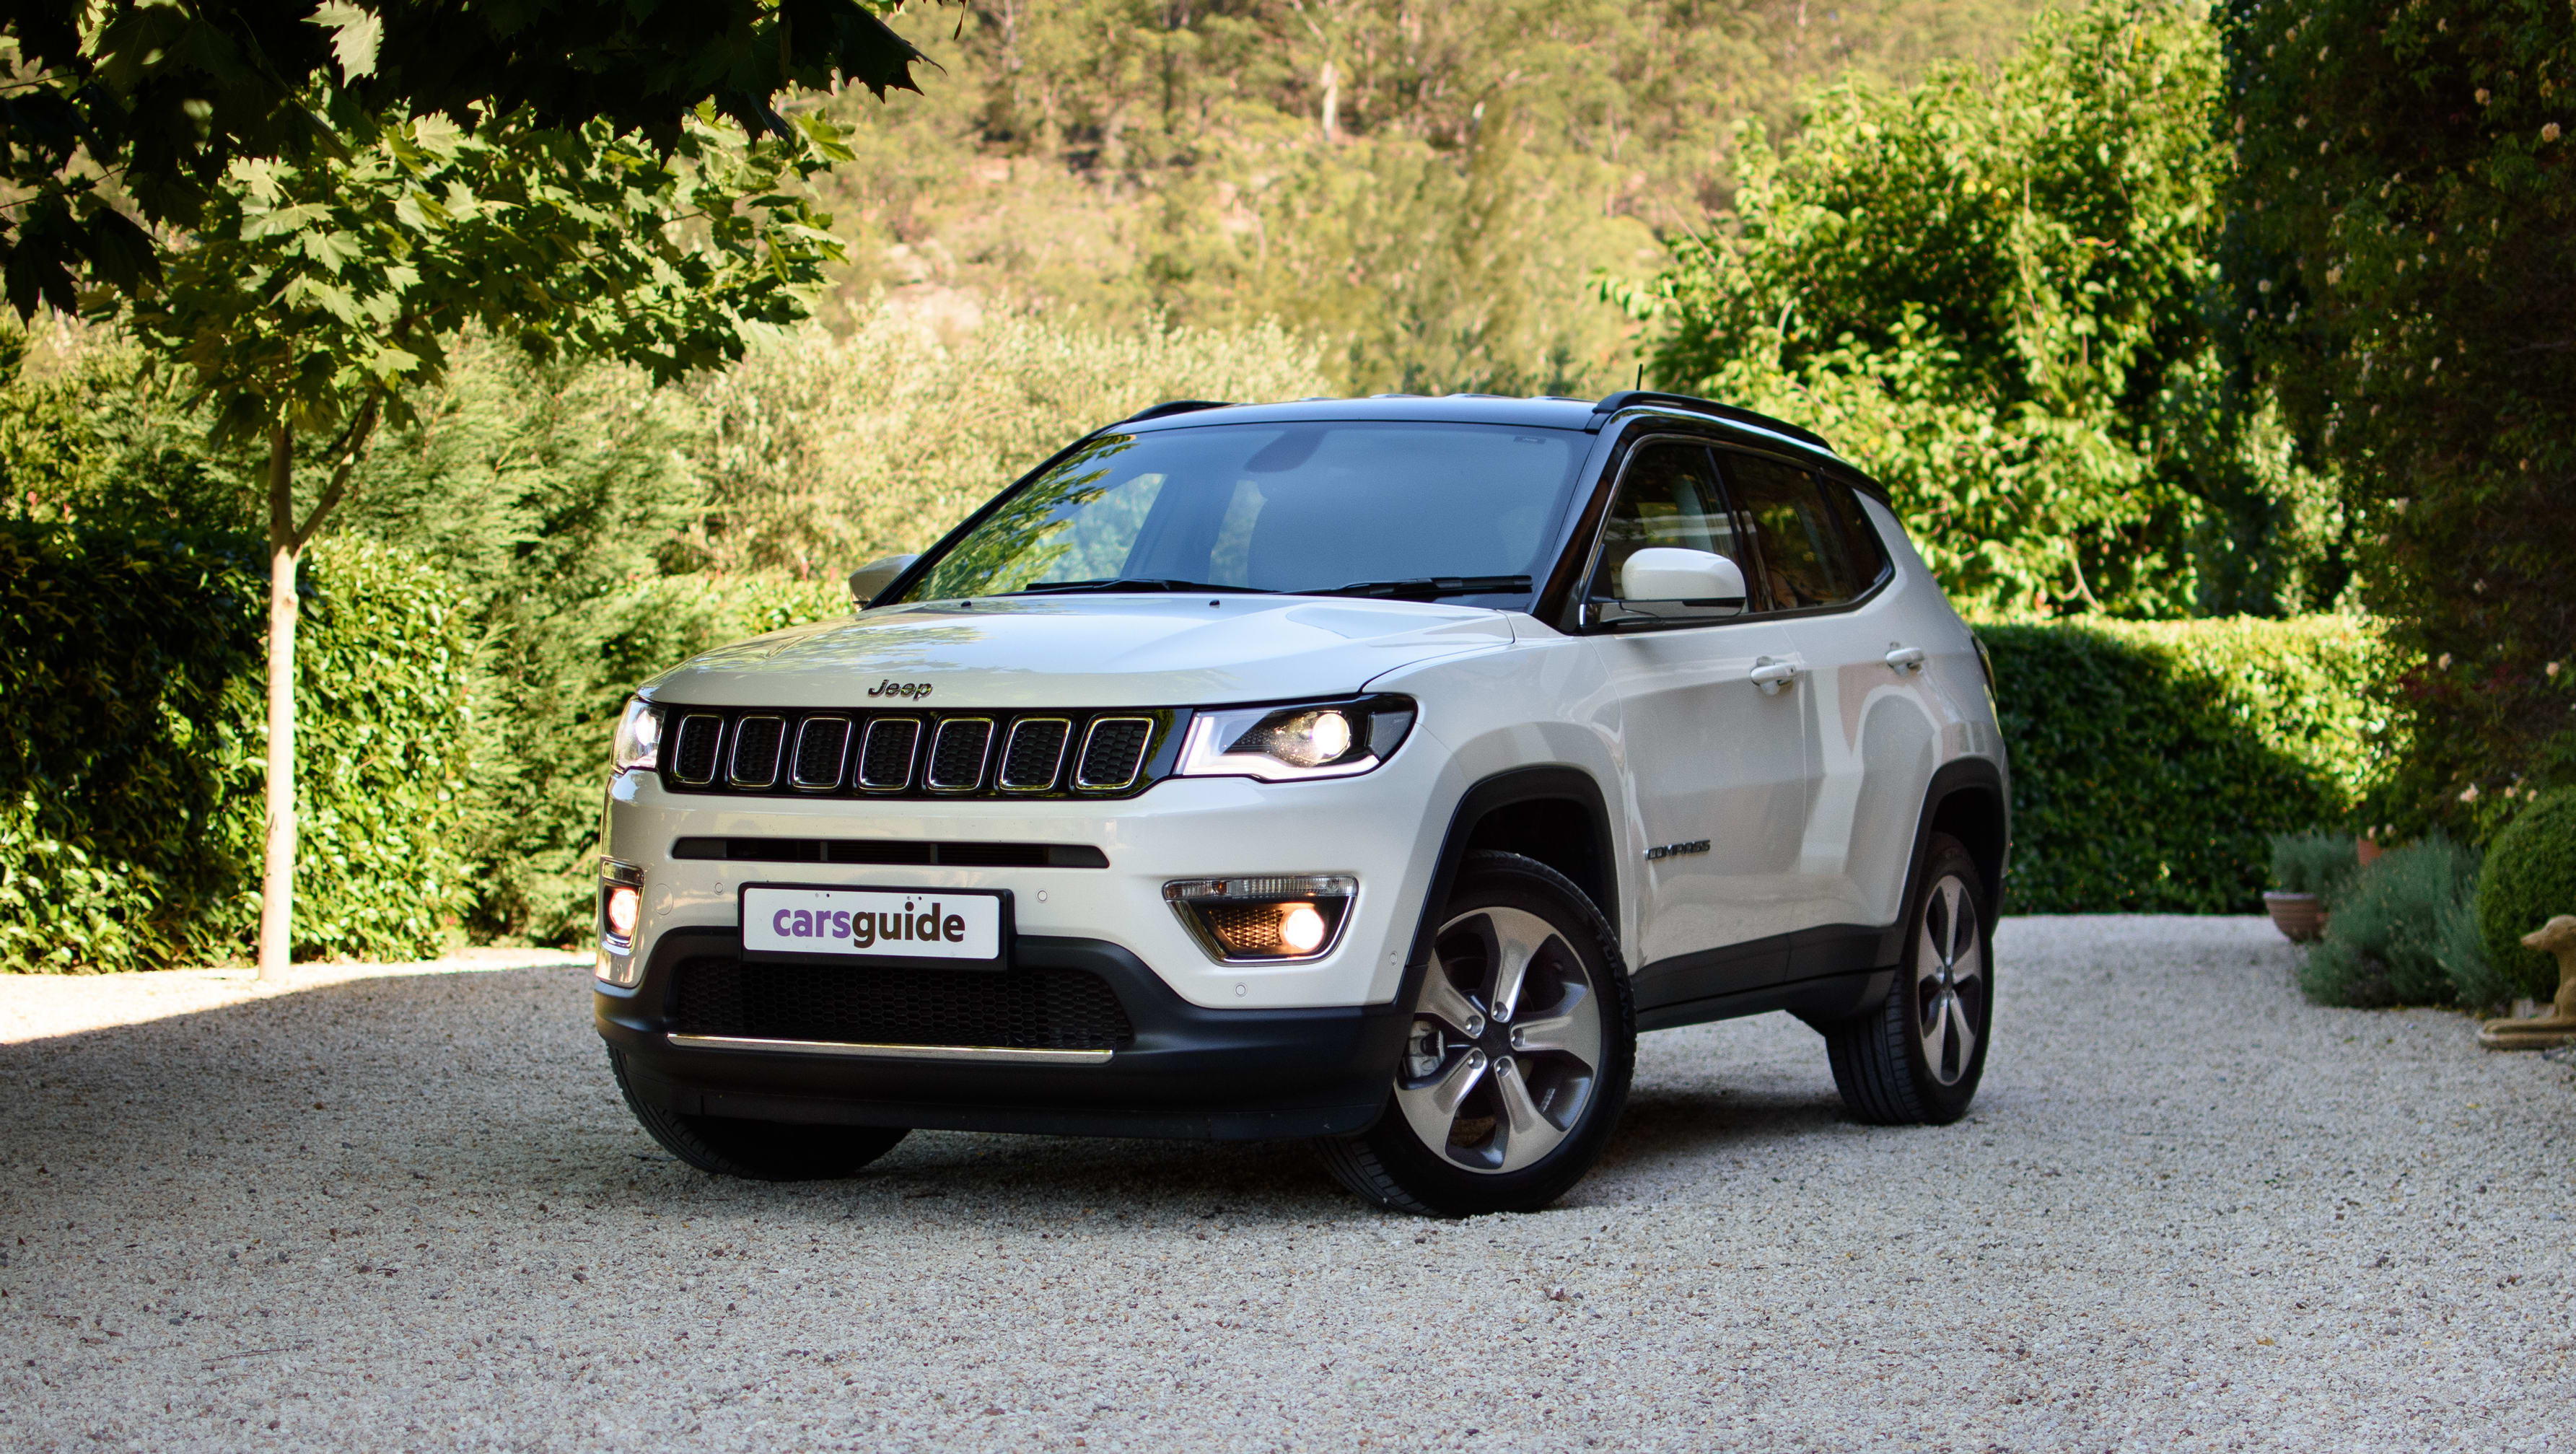 https://carsguide-res.cloudinary.com/image/upload/f_auto%2Cfl_lossy%2Cq_auto%2Ct_default/v1/editorial/jeep-compass-limited-4x4-my19-tw-1001x565-_1_.jpg